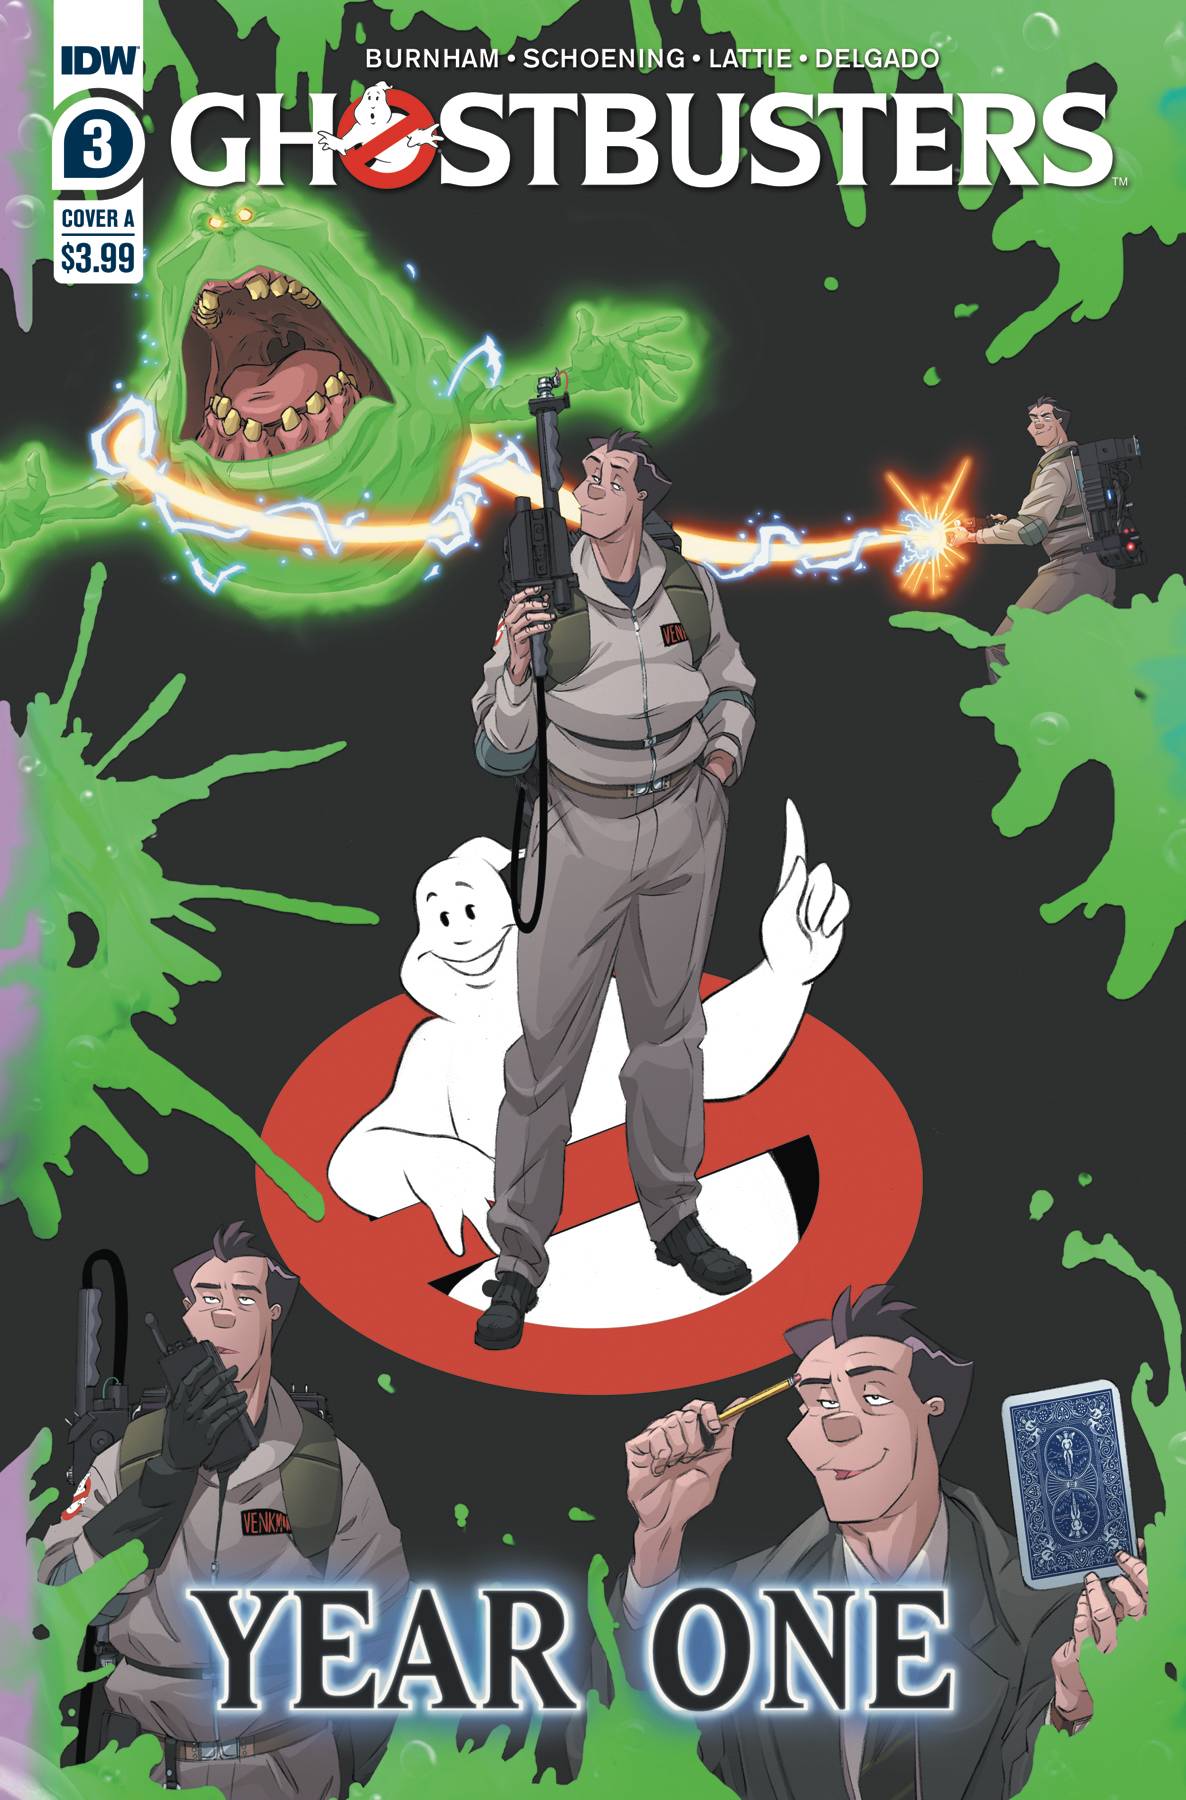 Ghostbusters Year One #3 Cover A Shoening (Of 4)